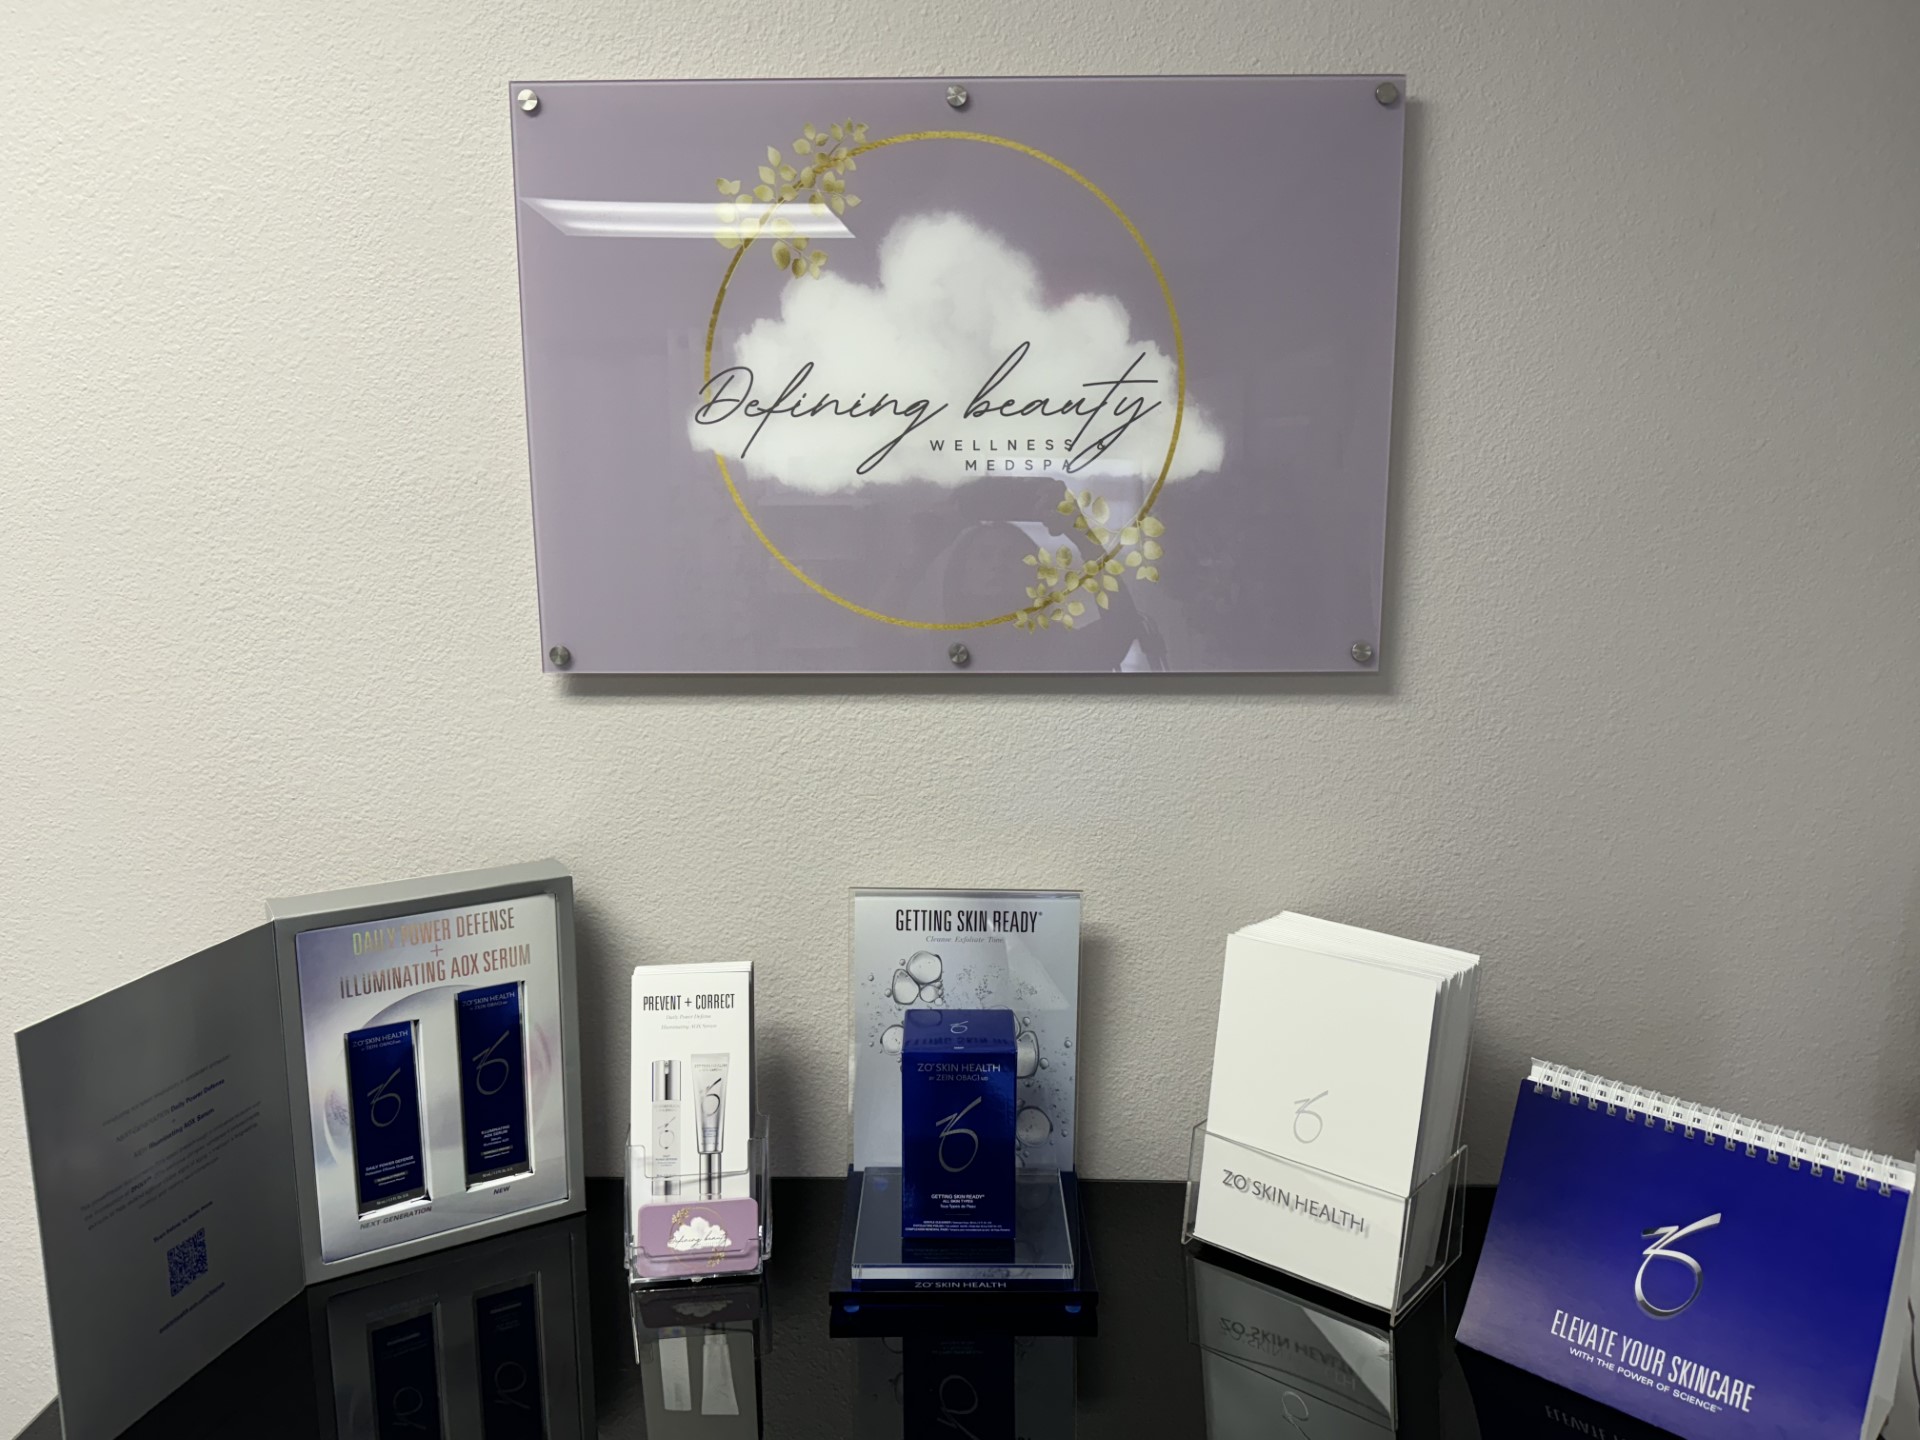 Products for sale at Defining Beauty and Med Spa in Tampa, FL.